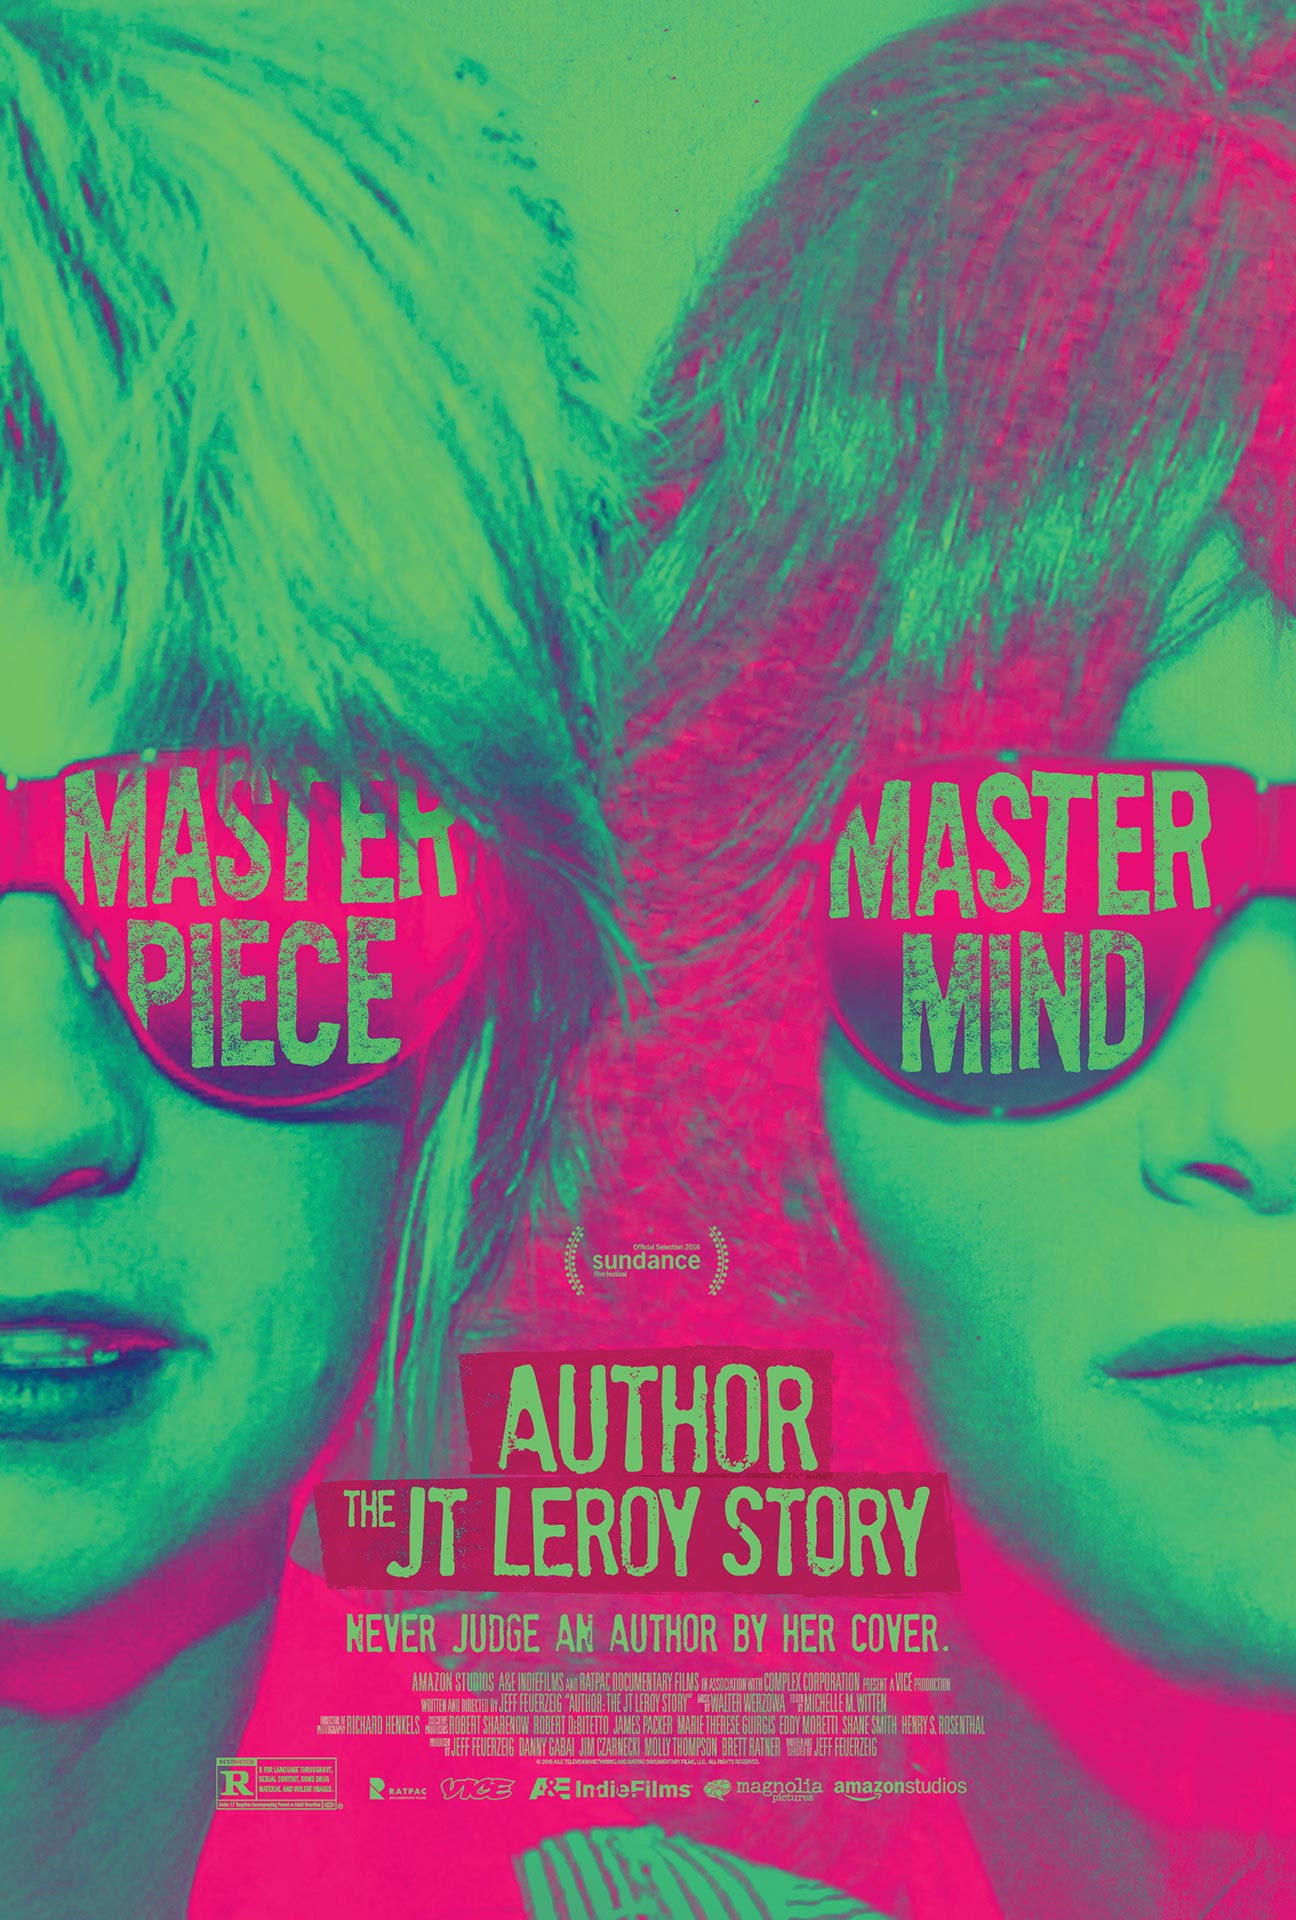 author-jt-leroy-story-poster